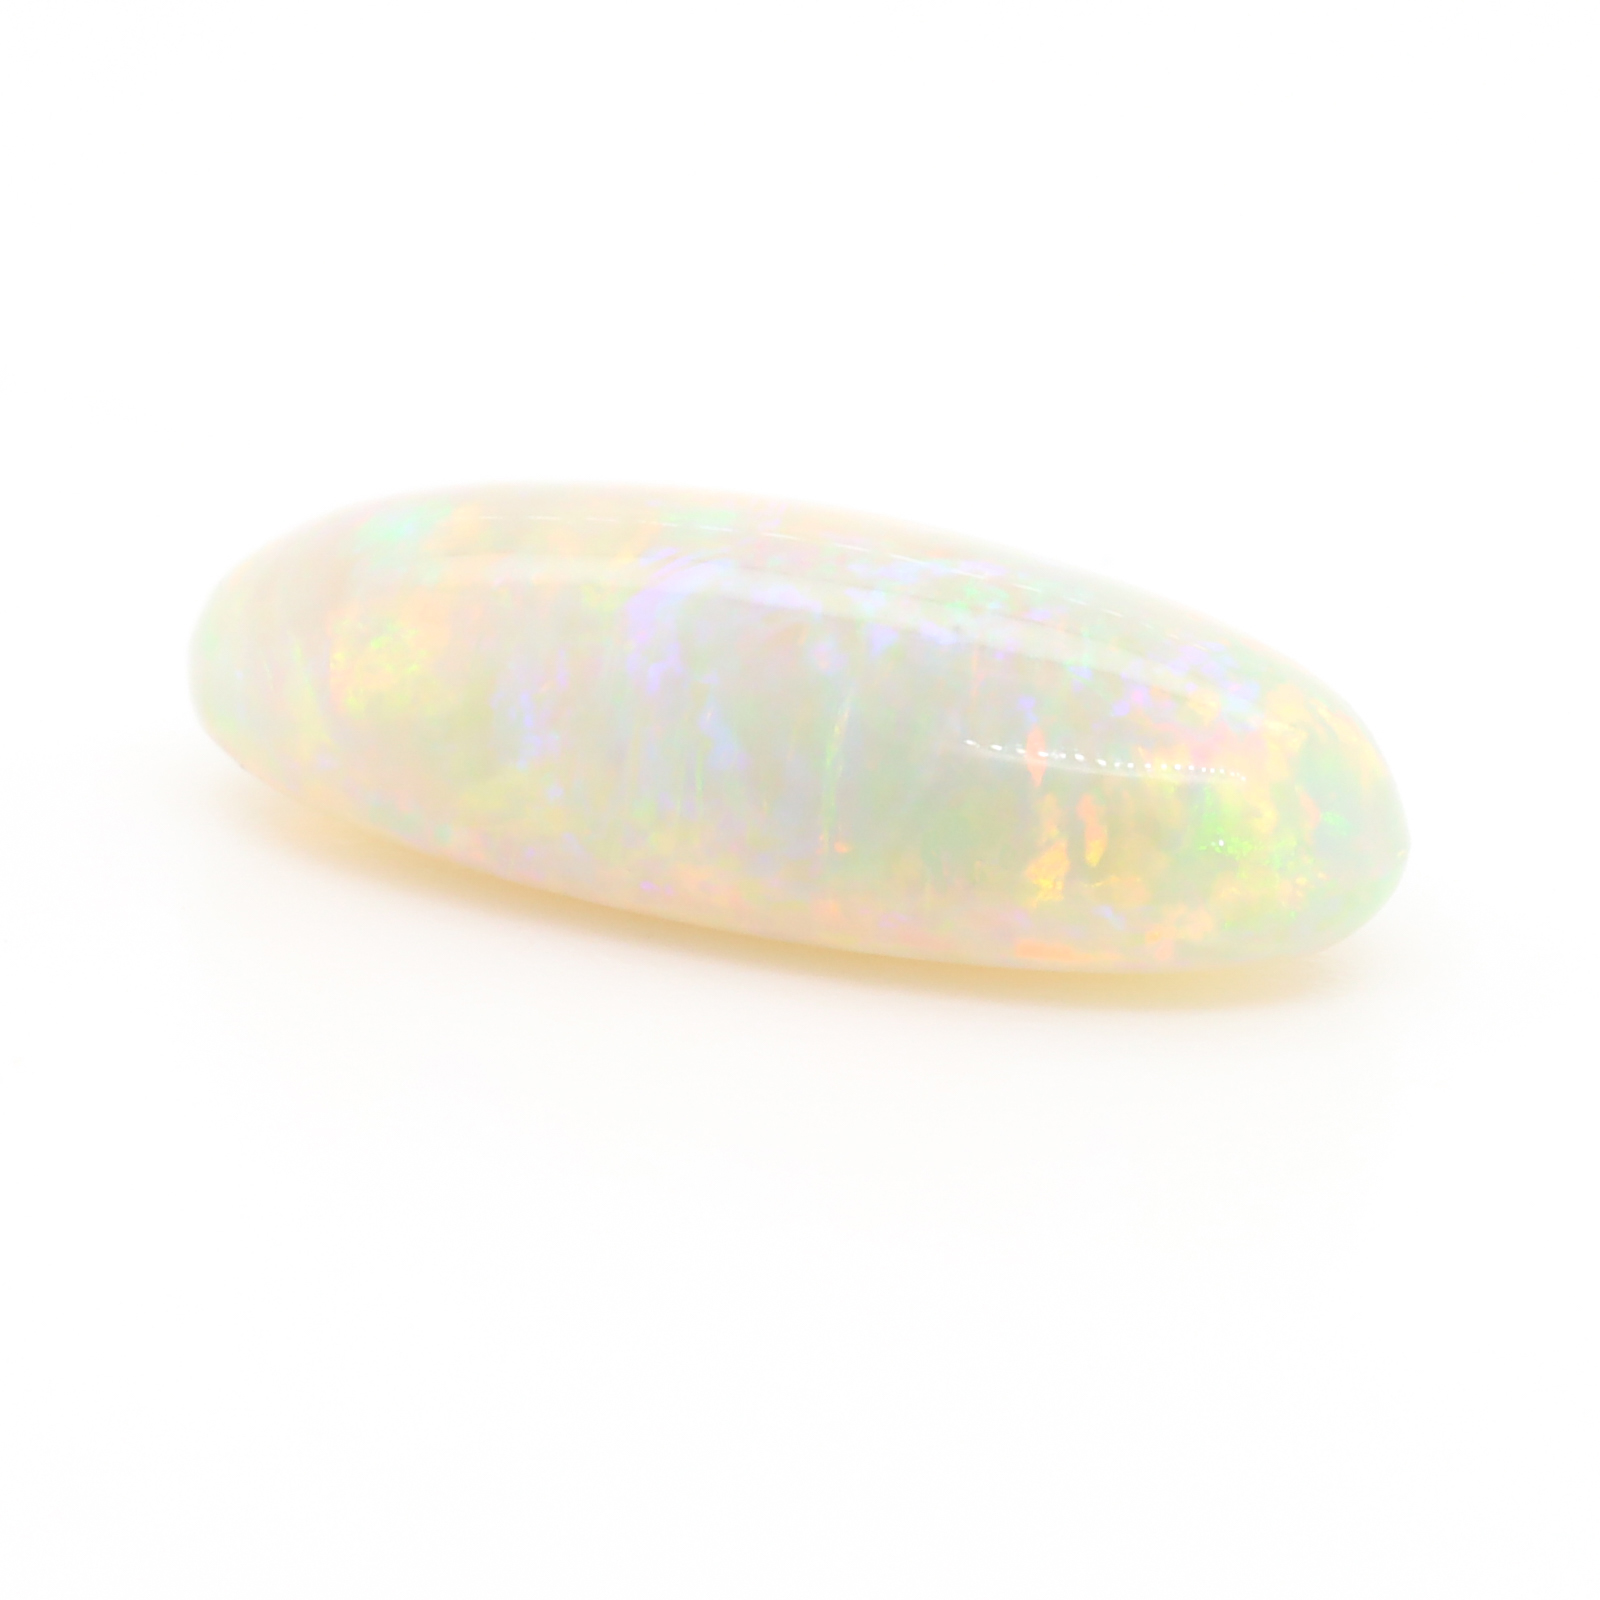 Blue, Green, Orange and purple Solid Unset Crystal Opal